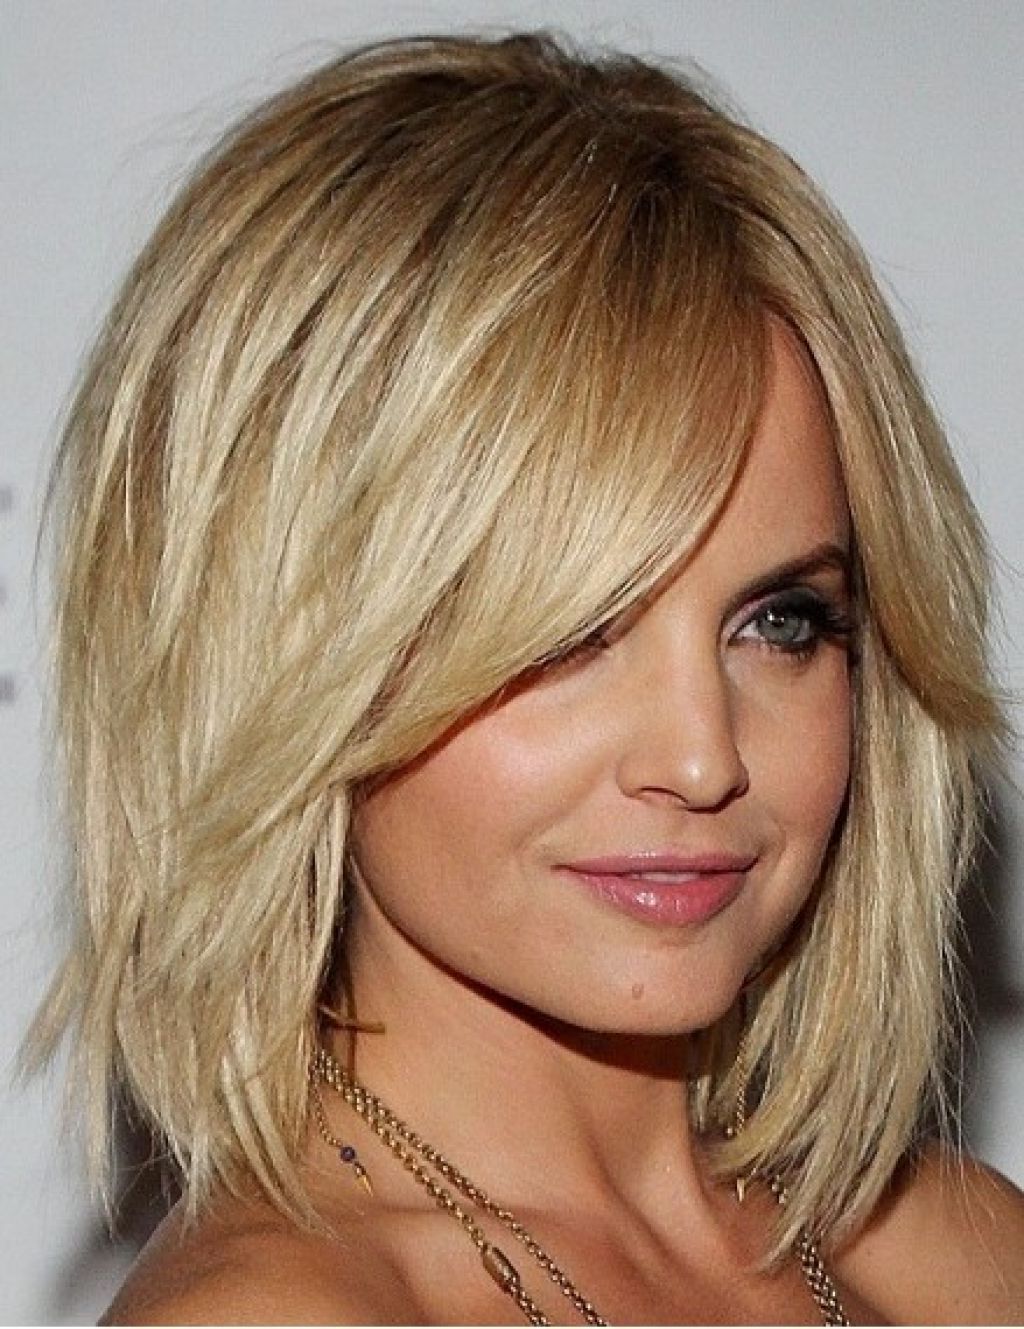 Widely Used Medium Hairstyles With Bangs For Oval Faces Throughout Choppy Bob Style For Mid Length Hair On Women (Gallery 20 of 20)